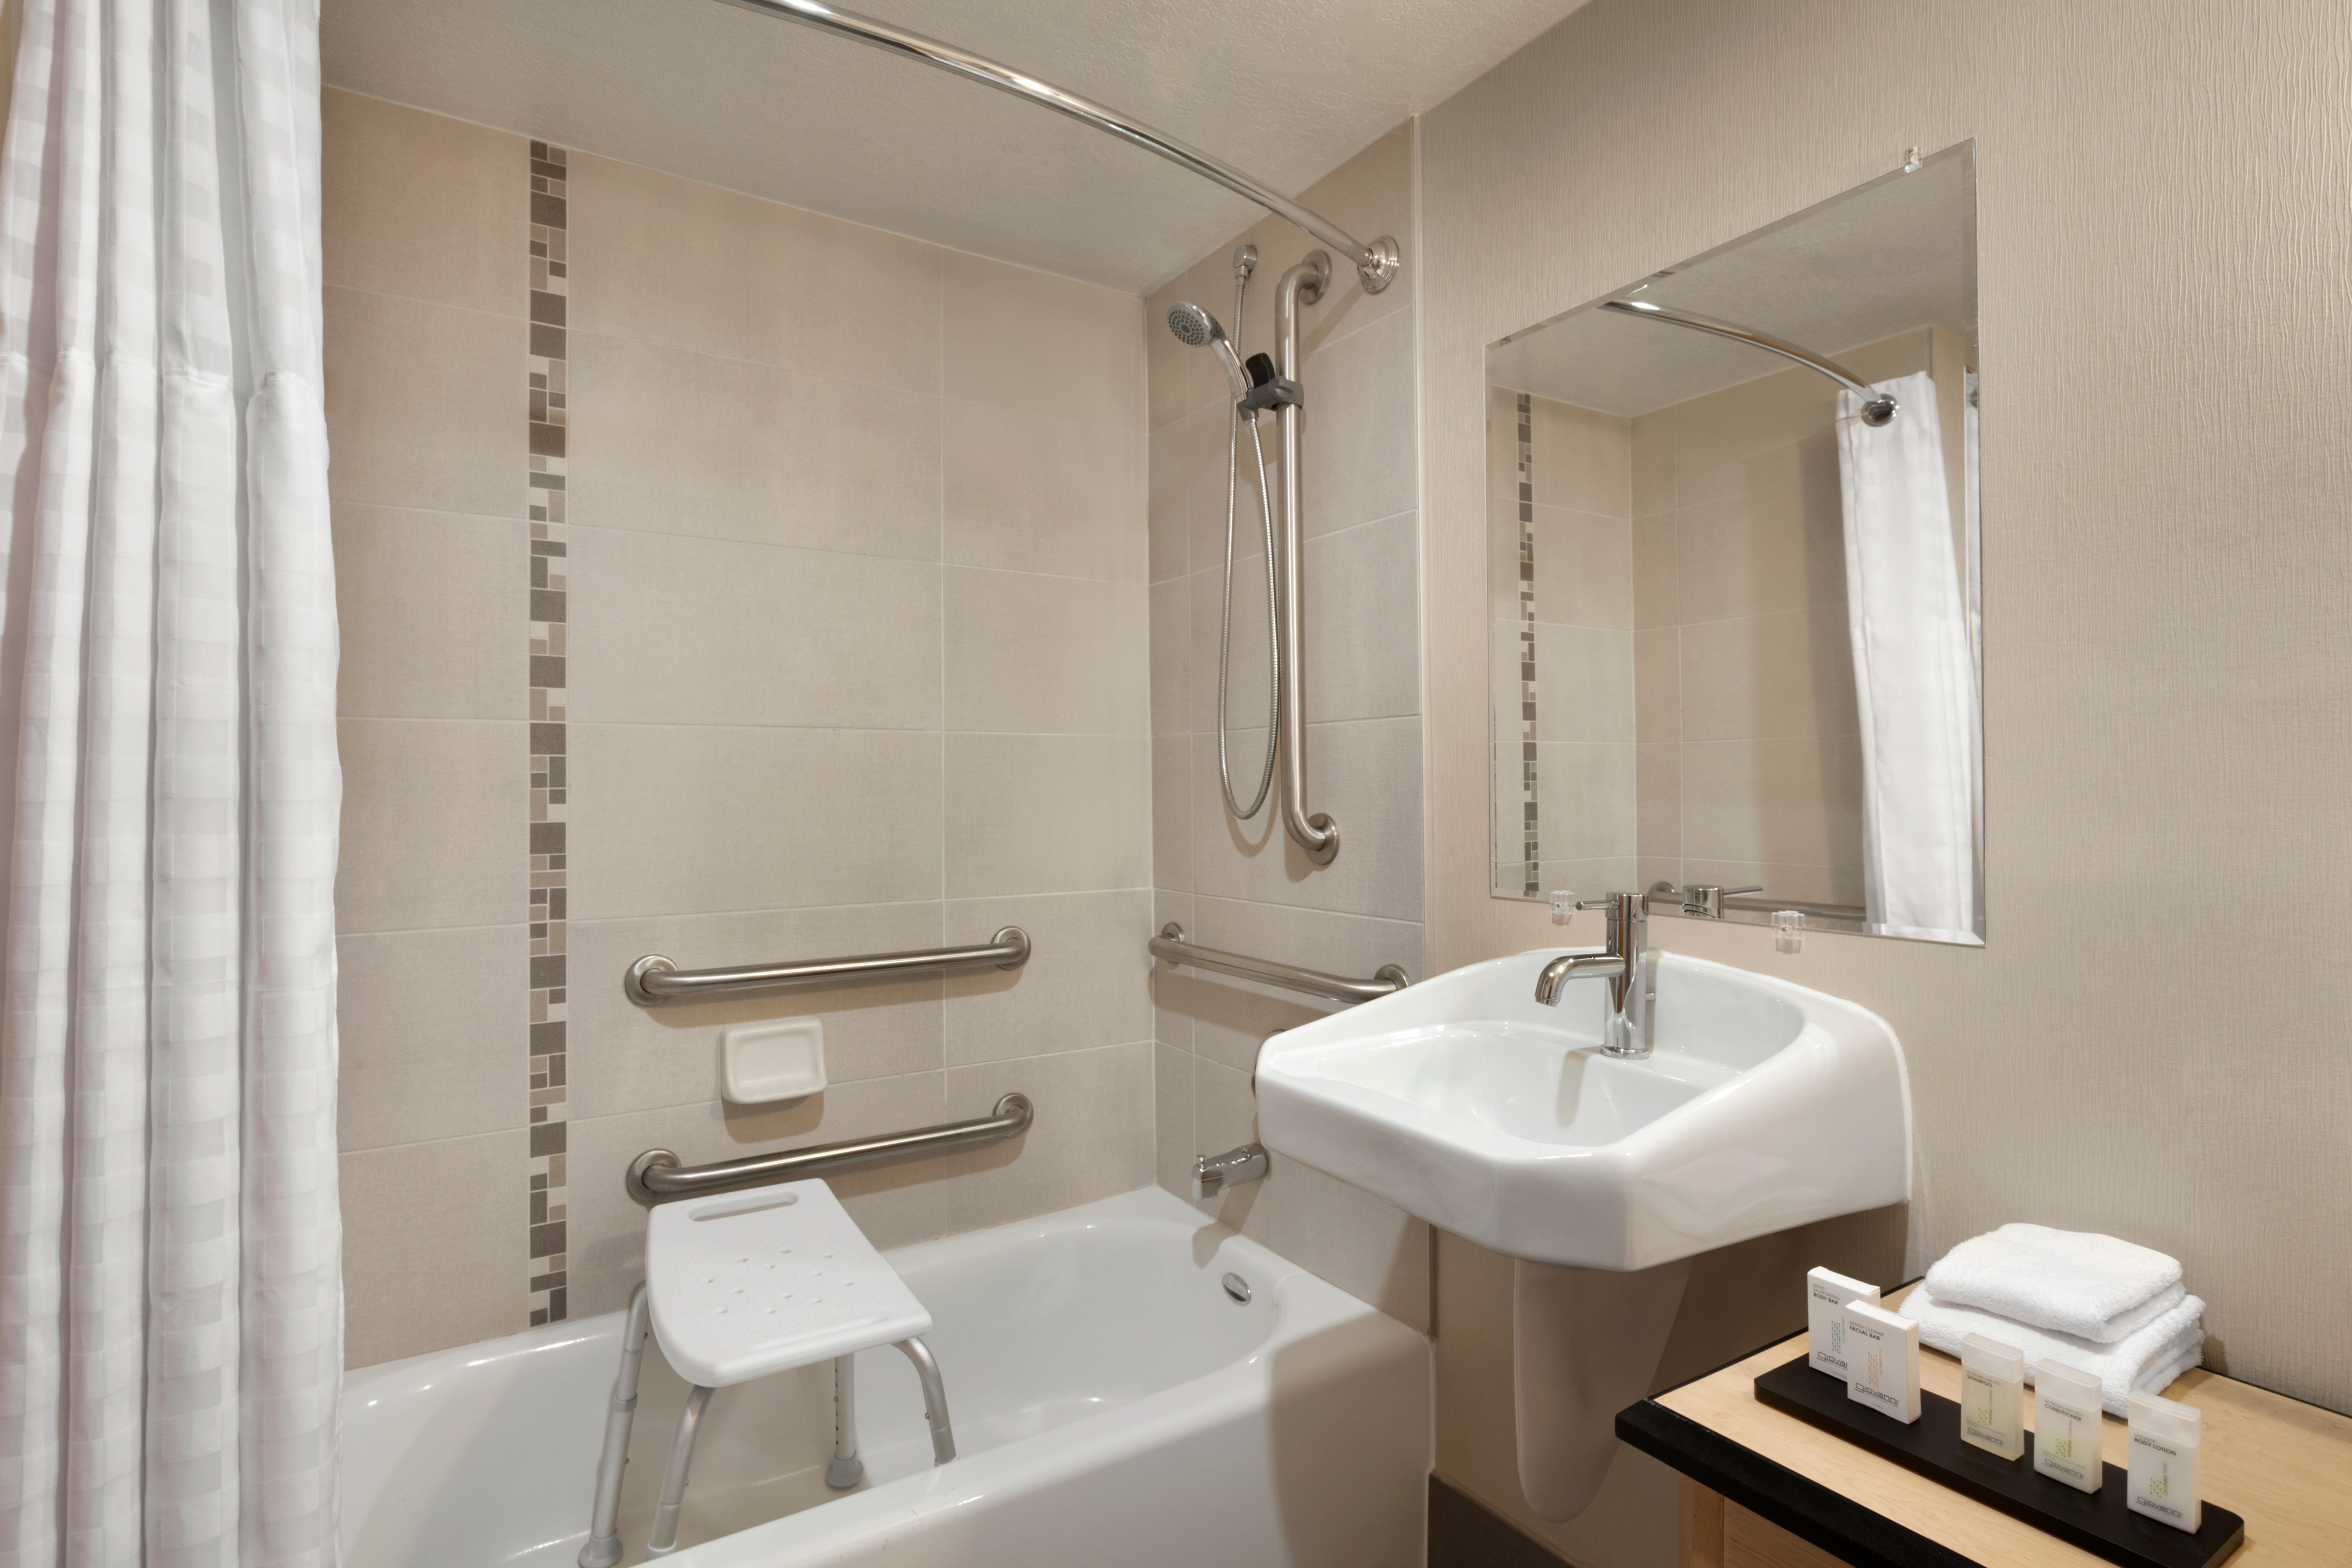 Accessible Guest Bathroom Tub with Handrails and Seat